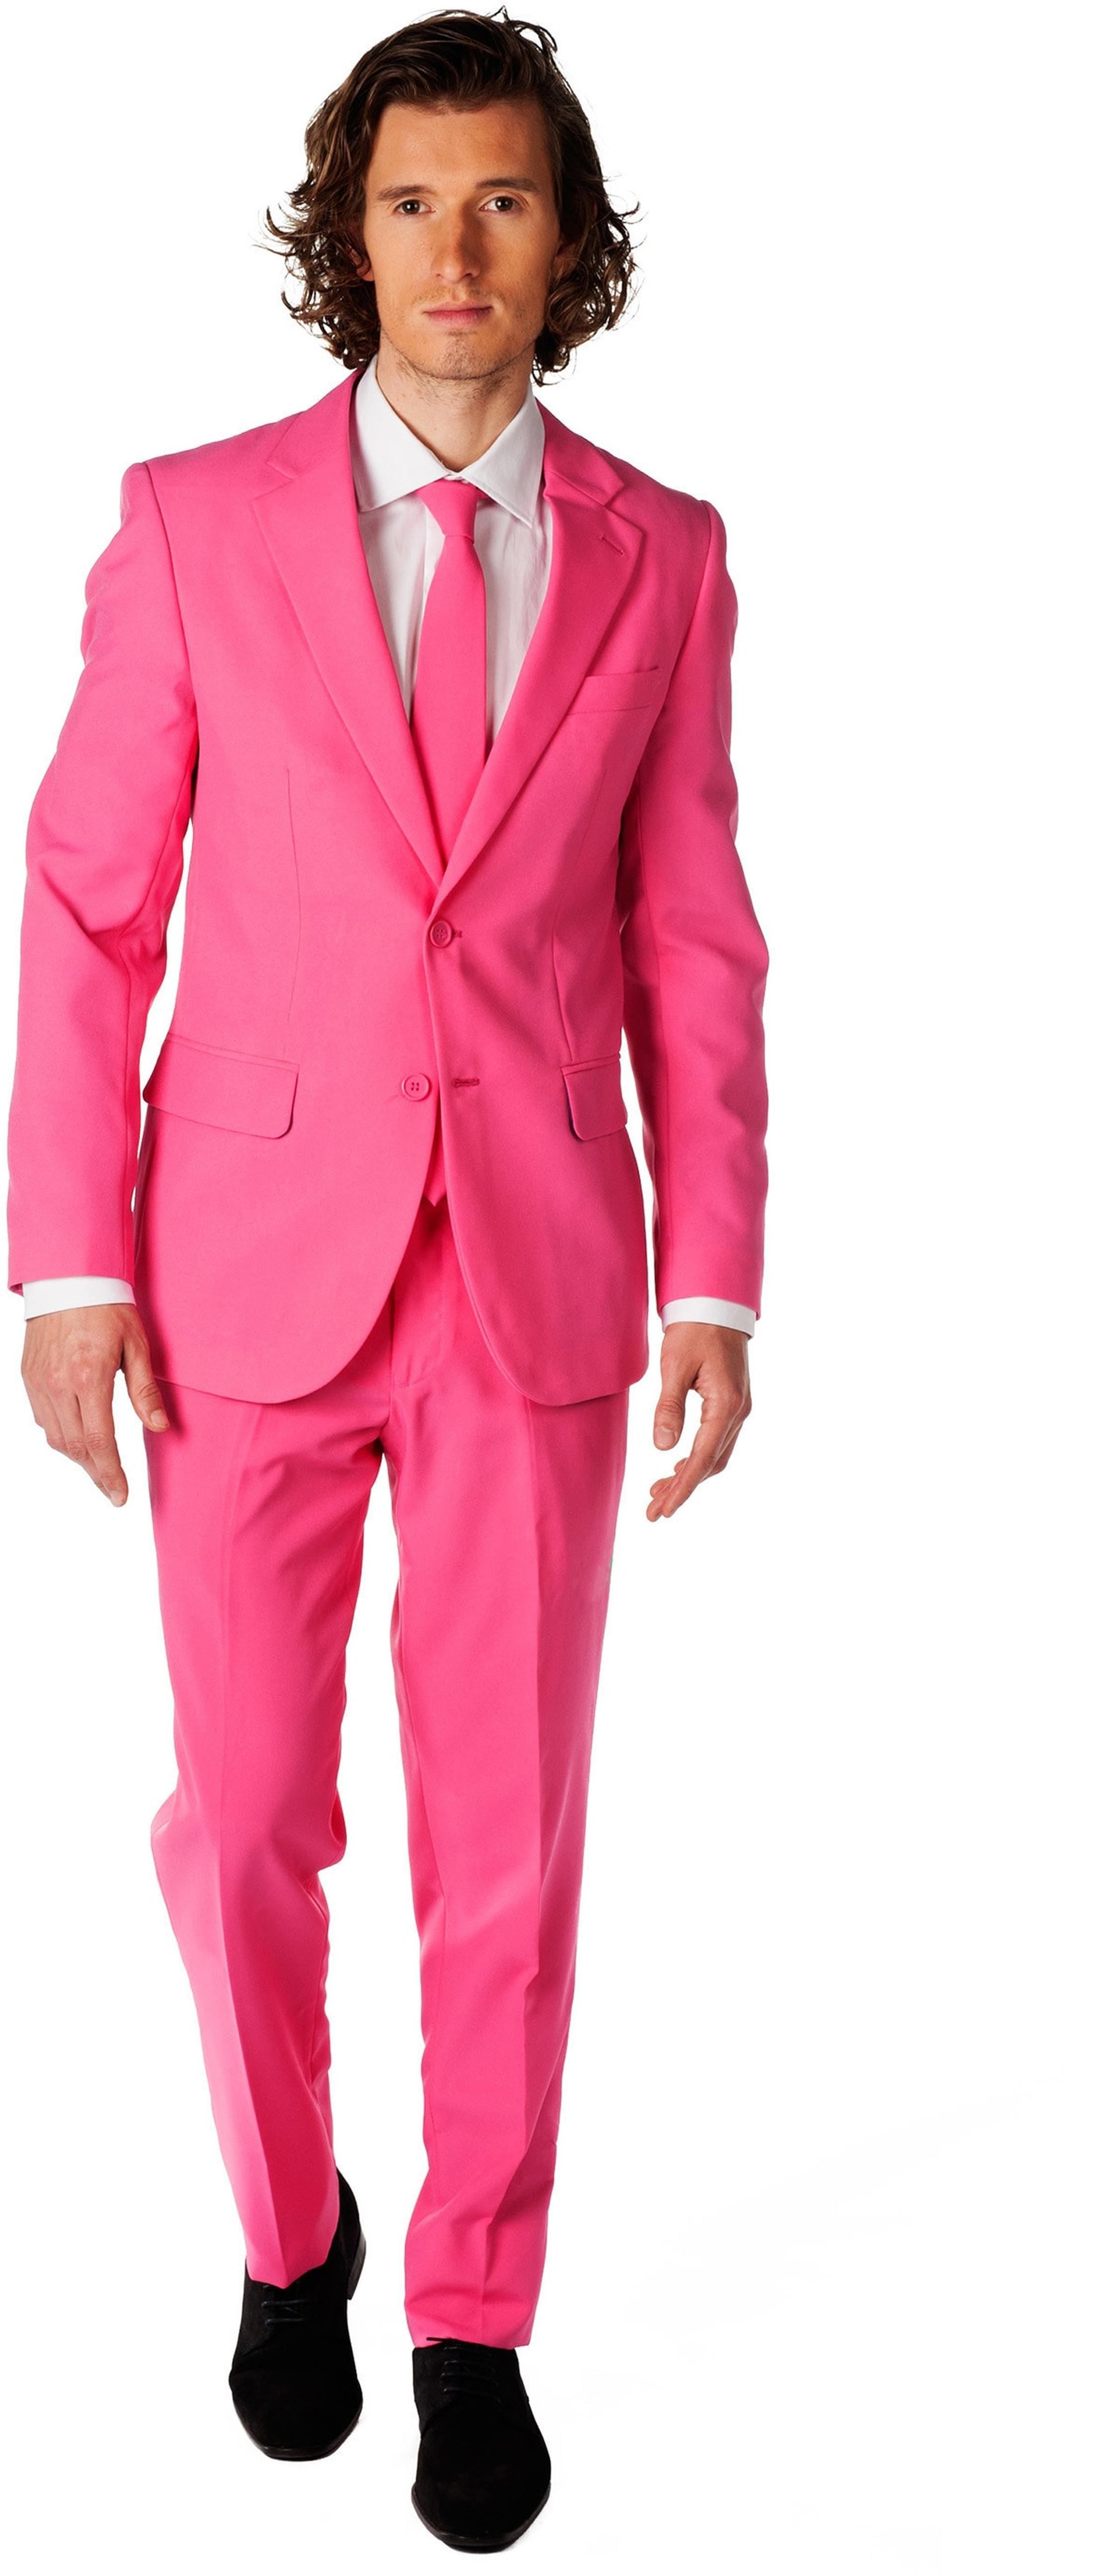 OppoSuits Costume Mr Rose taille 46